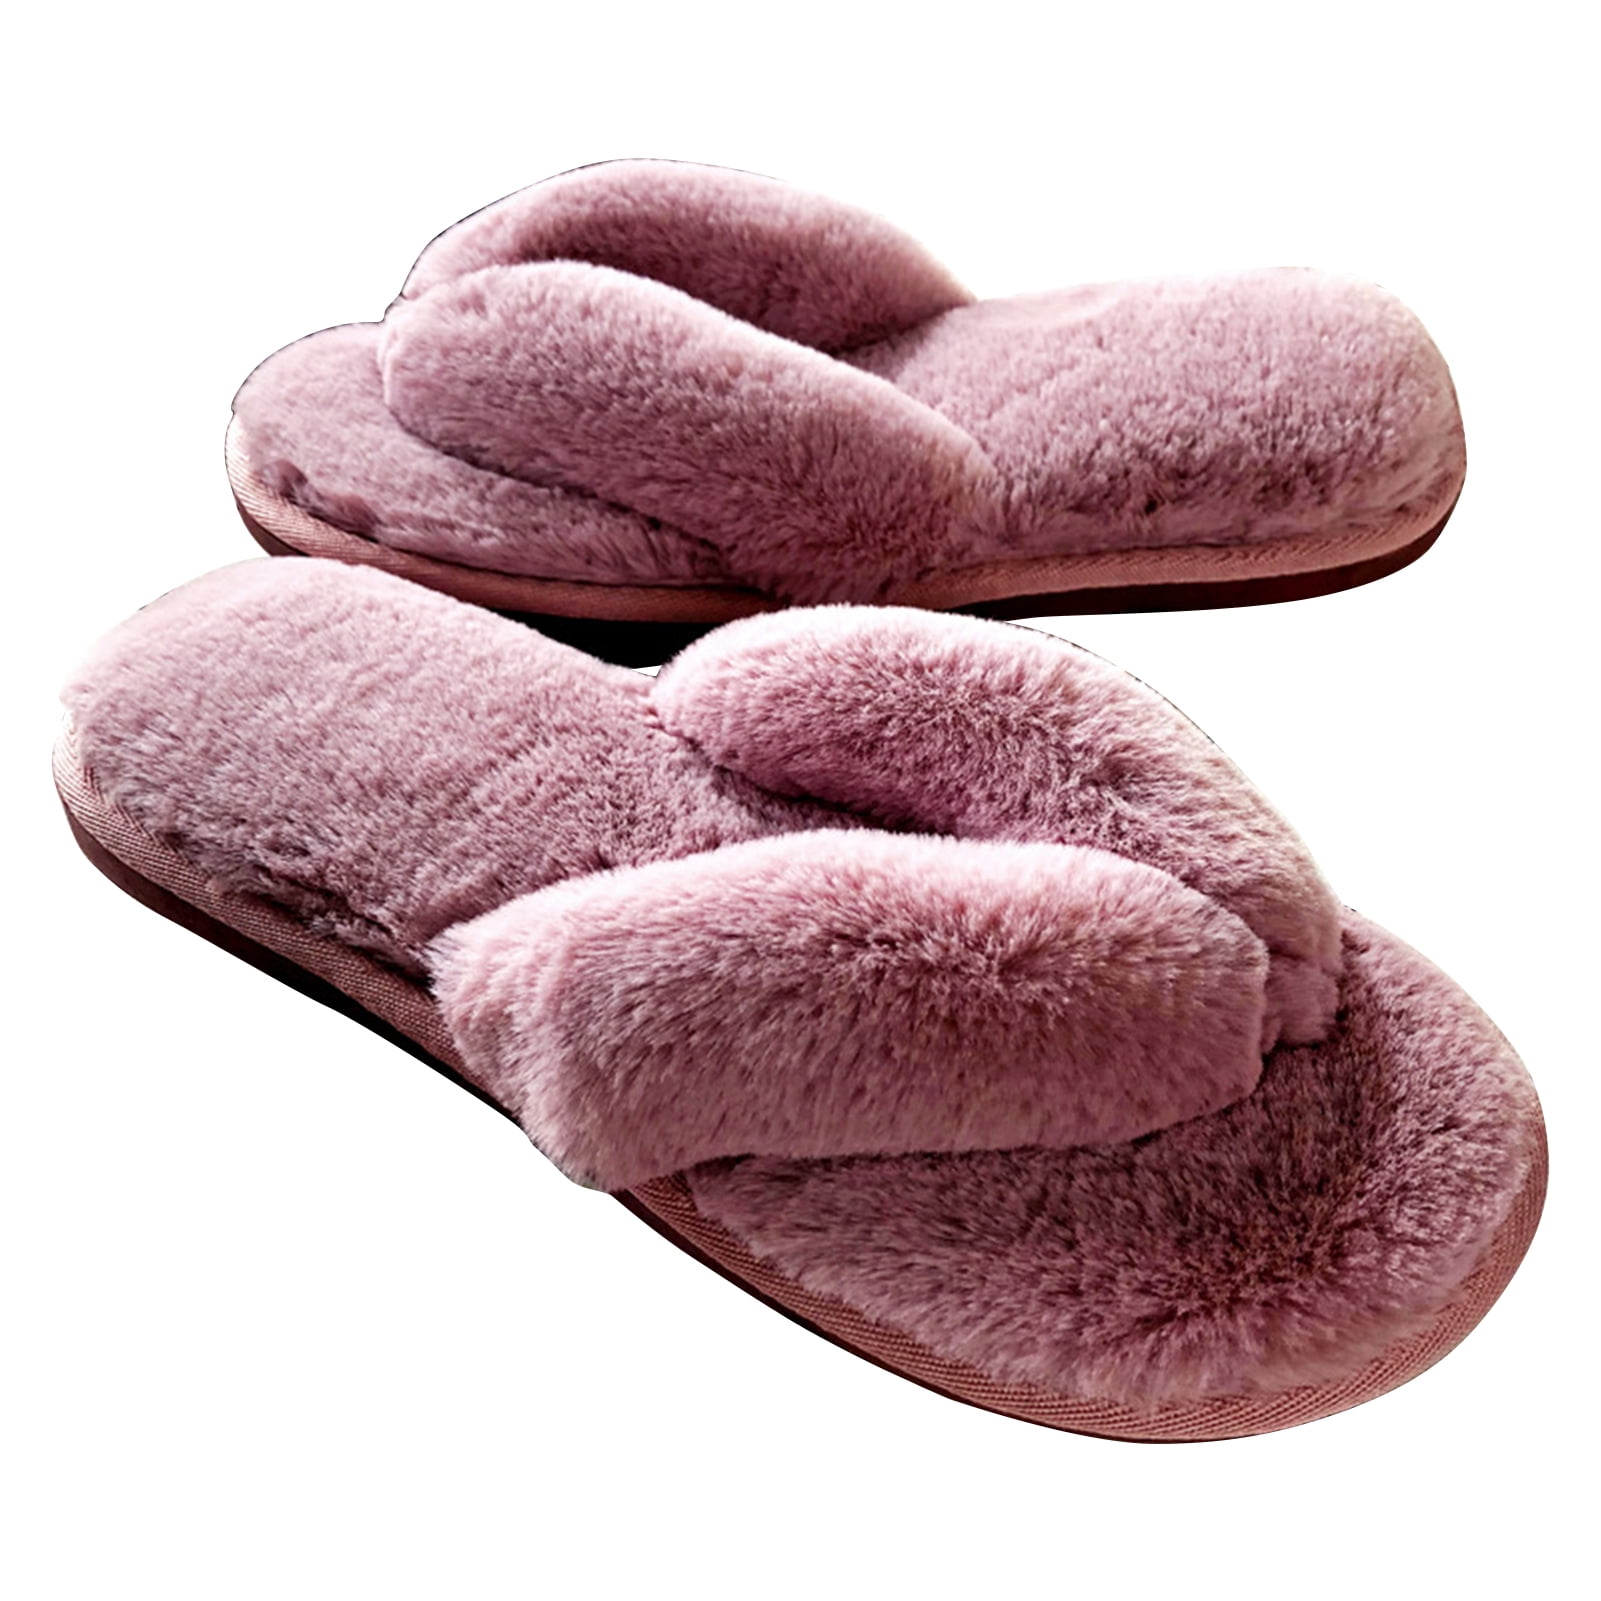 Flip Flops for Girls,Ladies Autumn and Winter Furry Slippers, Thick-Soled  Fashion All-Match Cotton Slippers-A-Black_36 price in UAE,  UAE